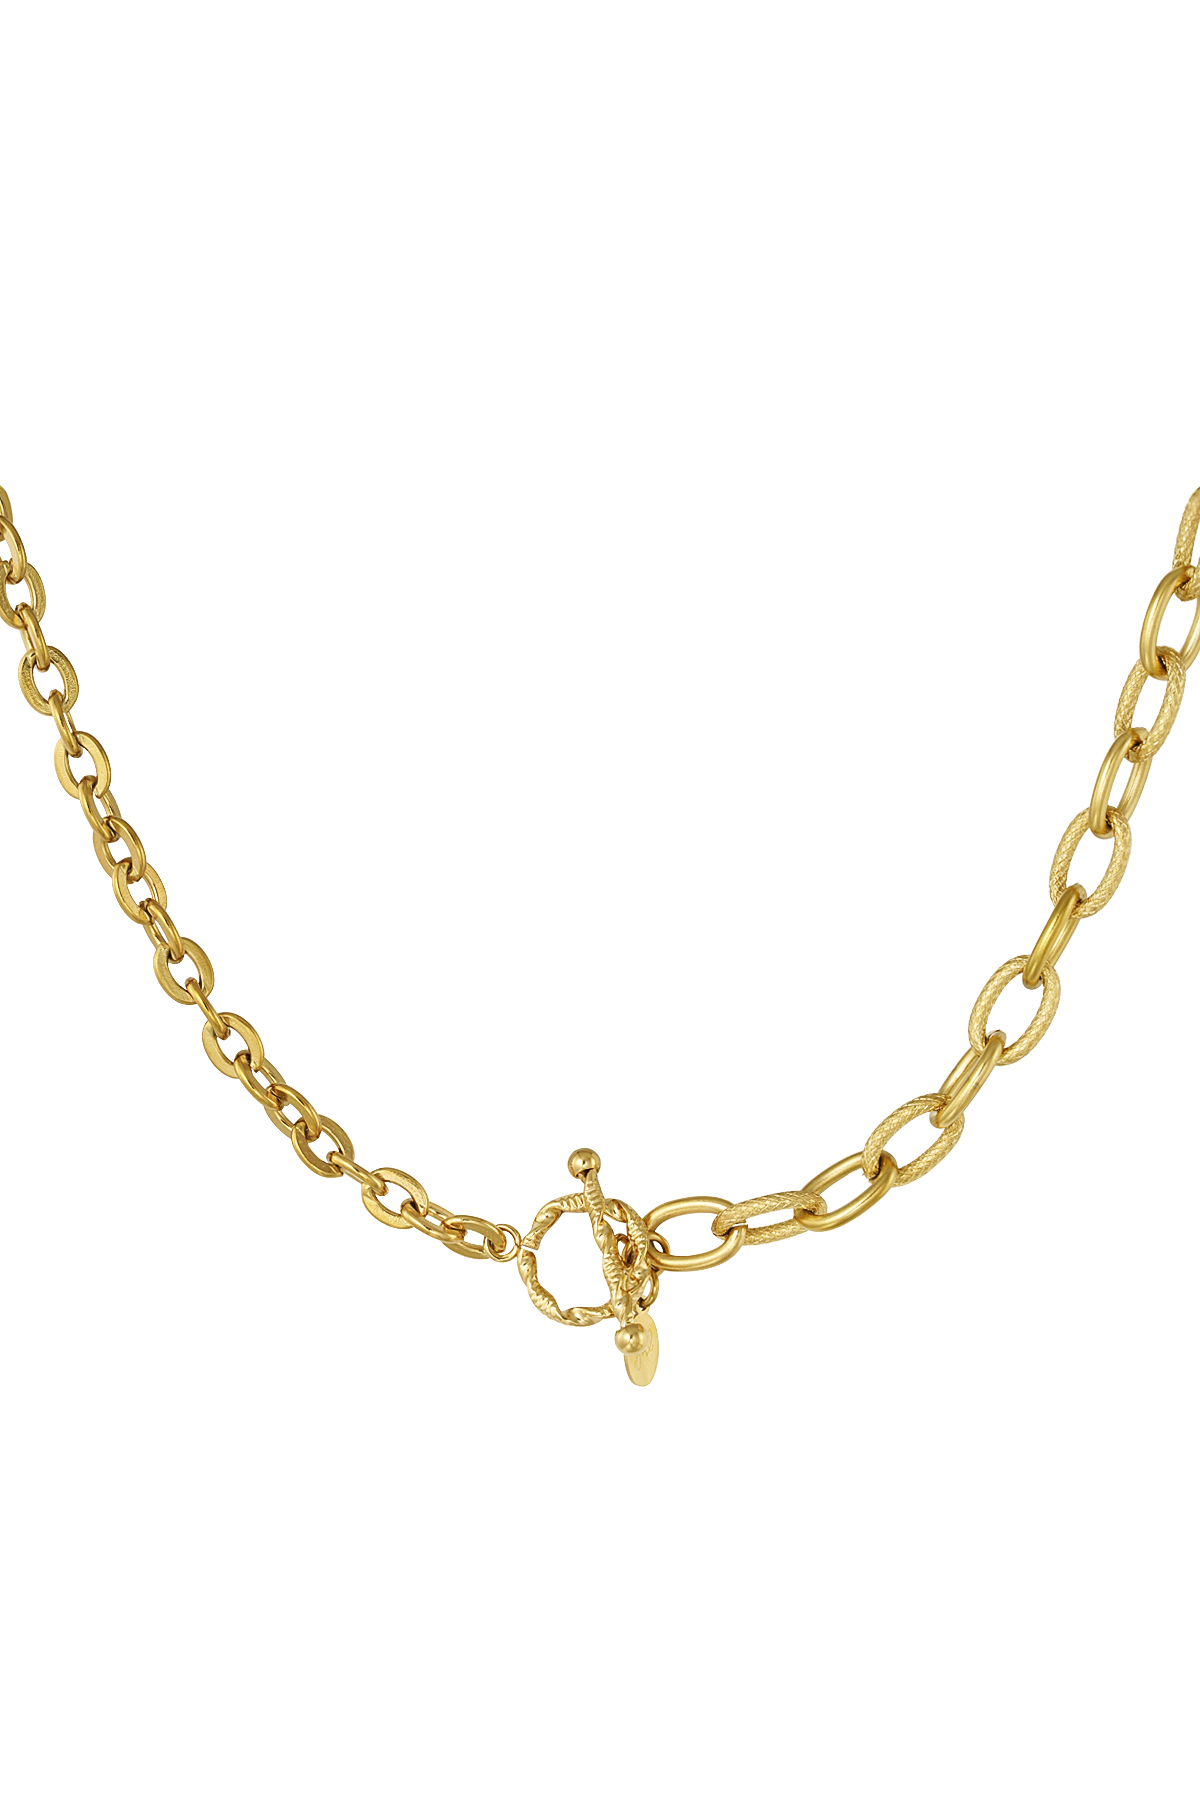 Link chain 2 sizes with round closure - gold